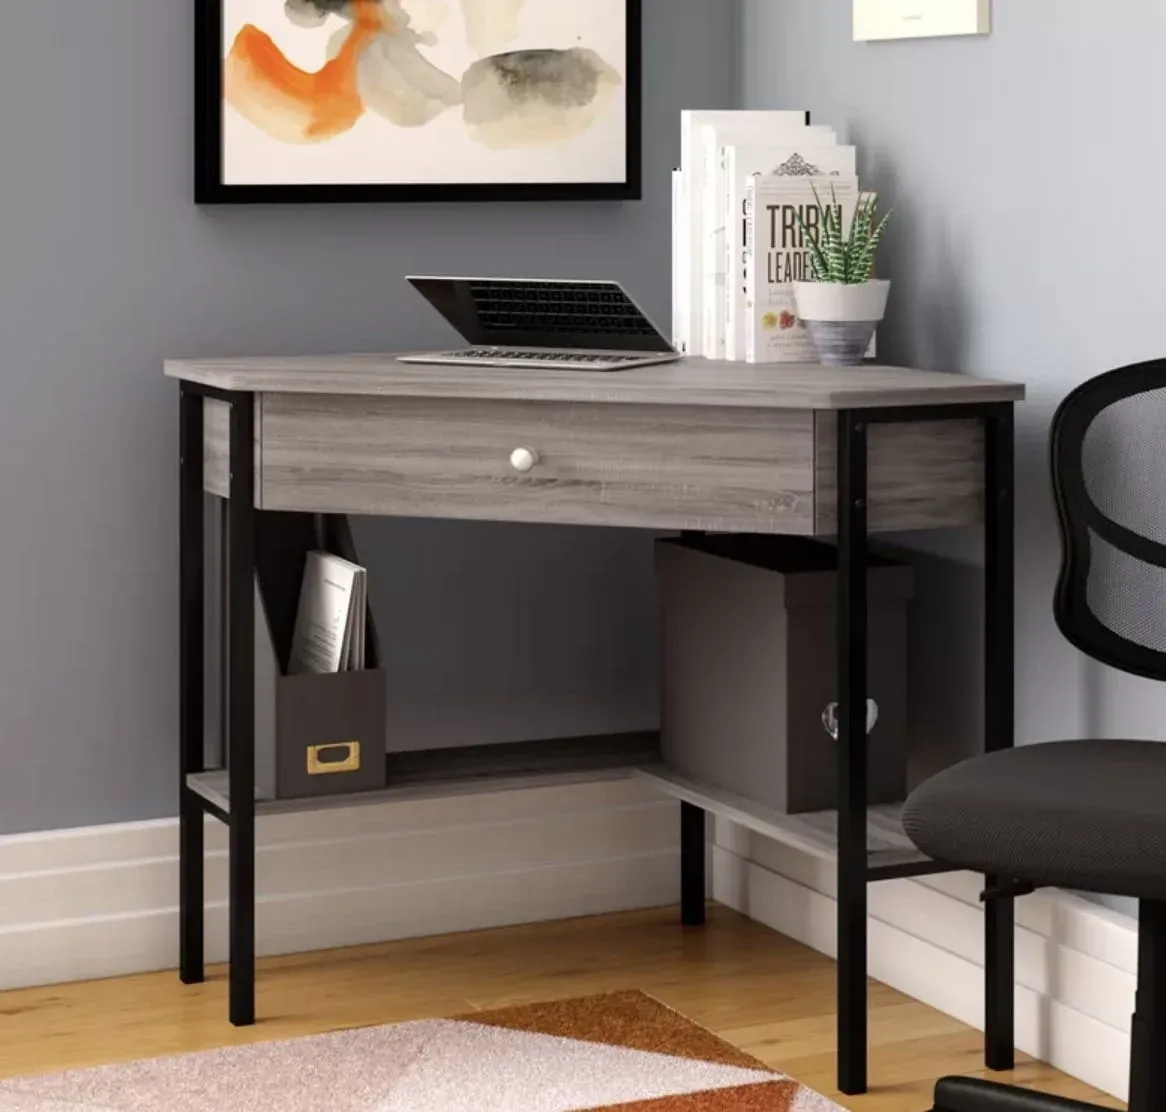 10 Home Office Desks - Options For Work At Home Spaces & Budgets